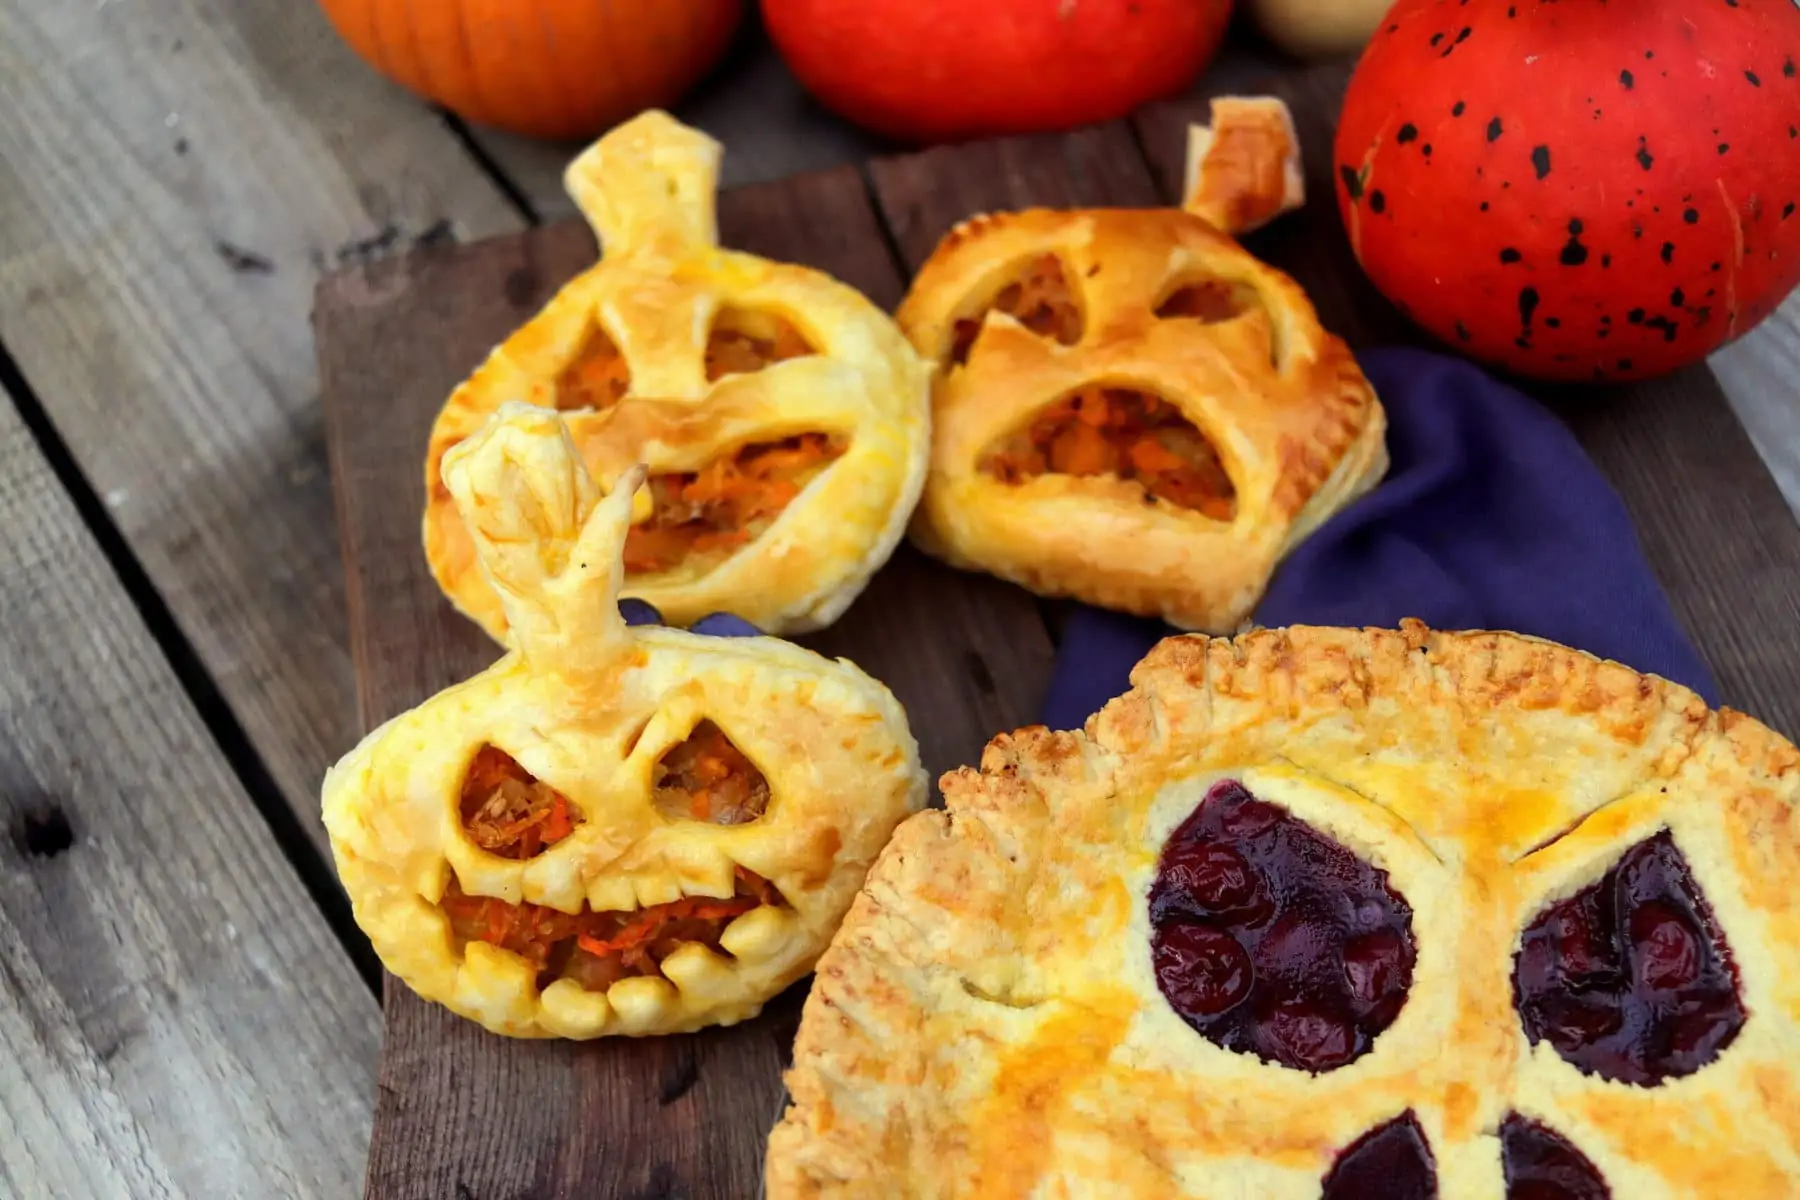 How to make a Halloween pie